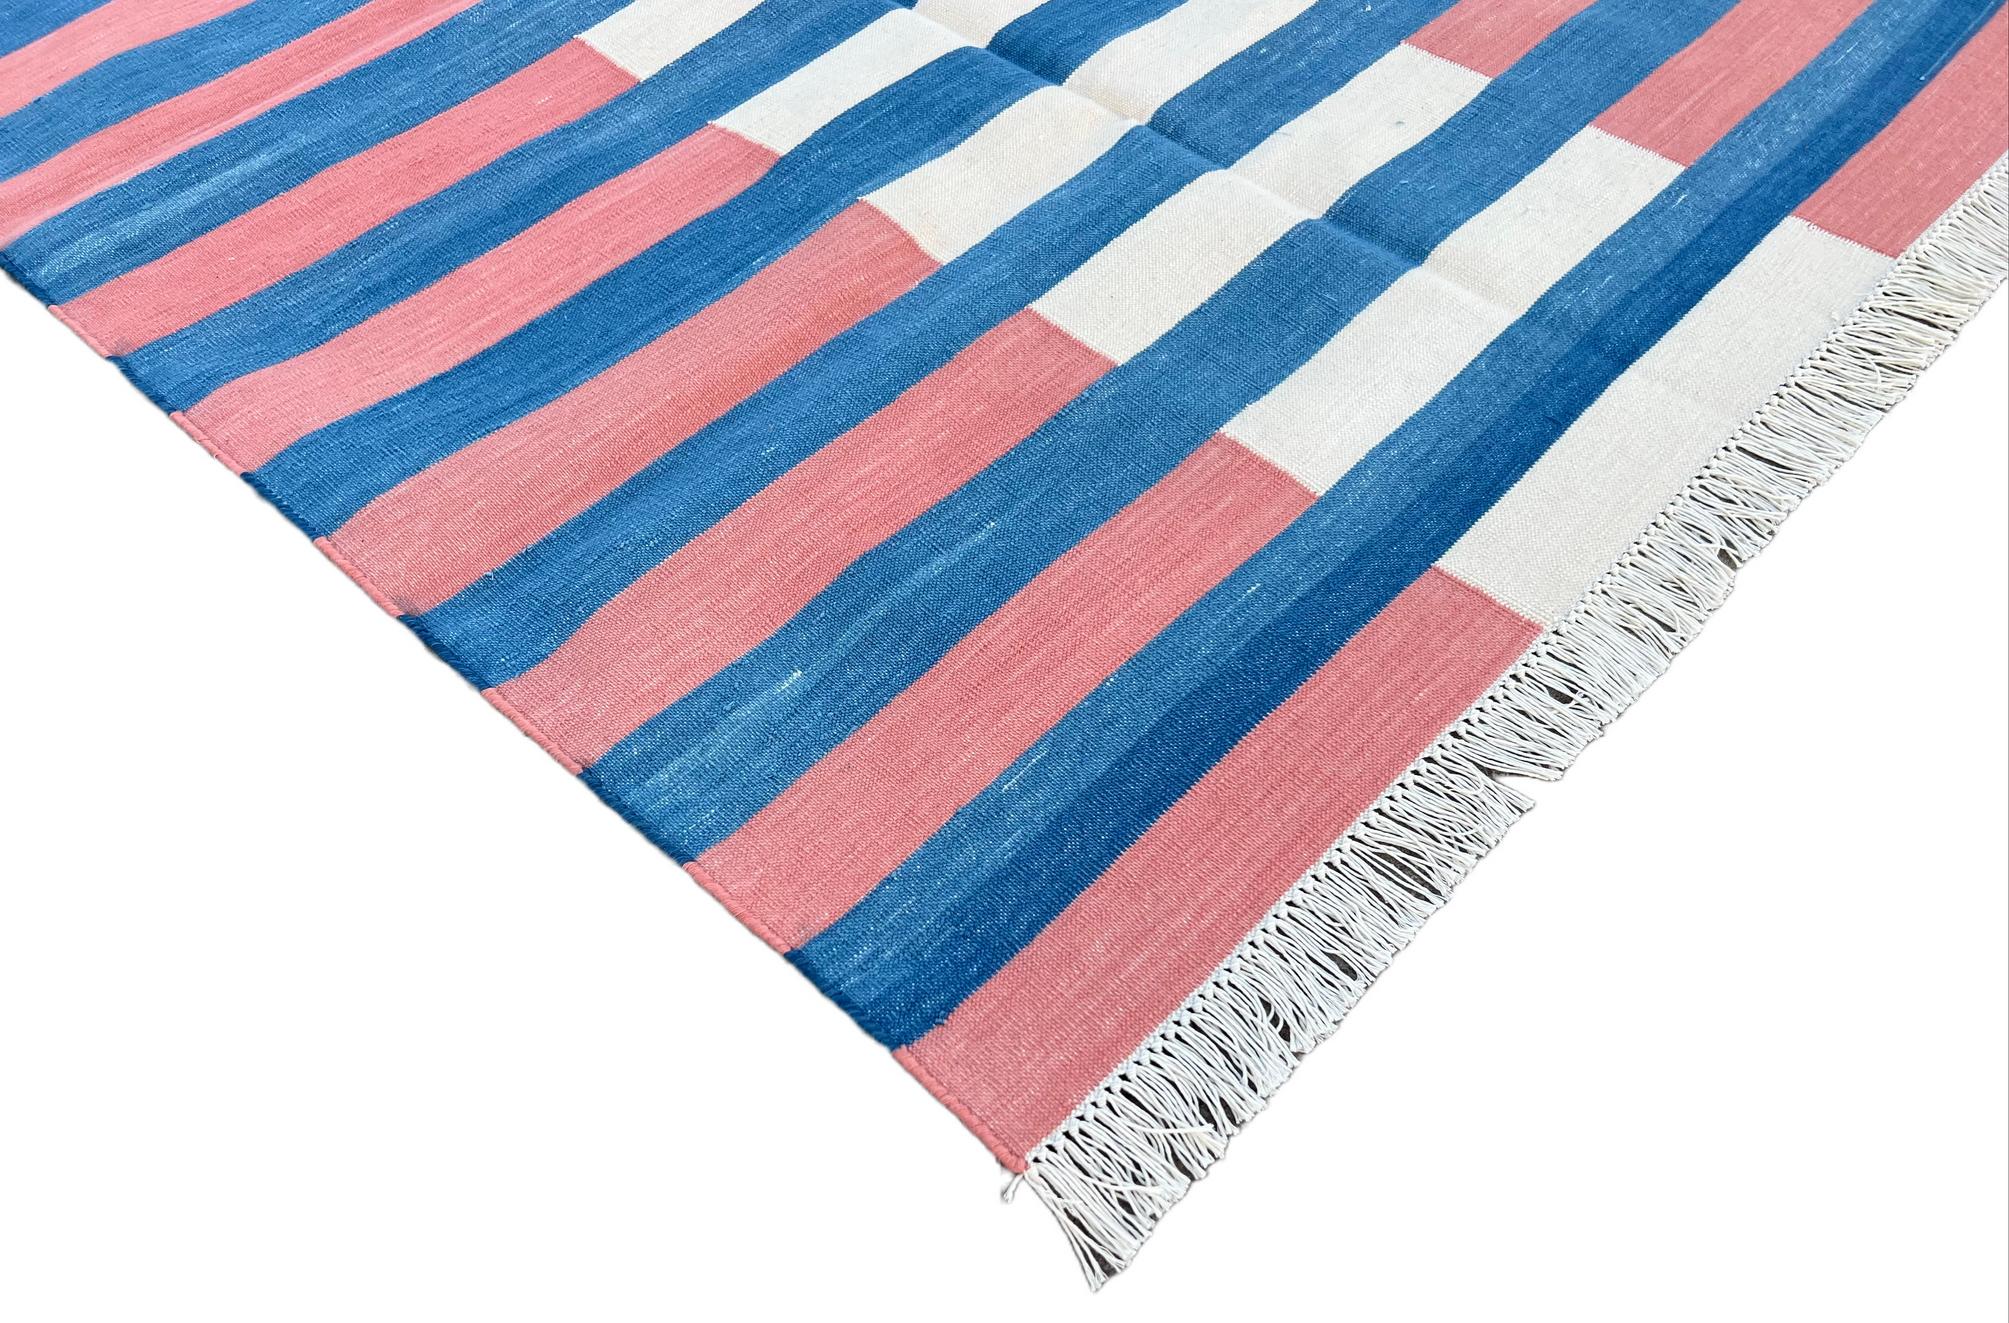 Hand-Woven Handmade Cotton Area Flat Weave Rug, 3x5 Blue And Red Striped Rug Indian Dhurrie For Sale